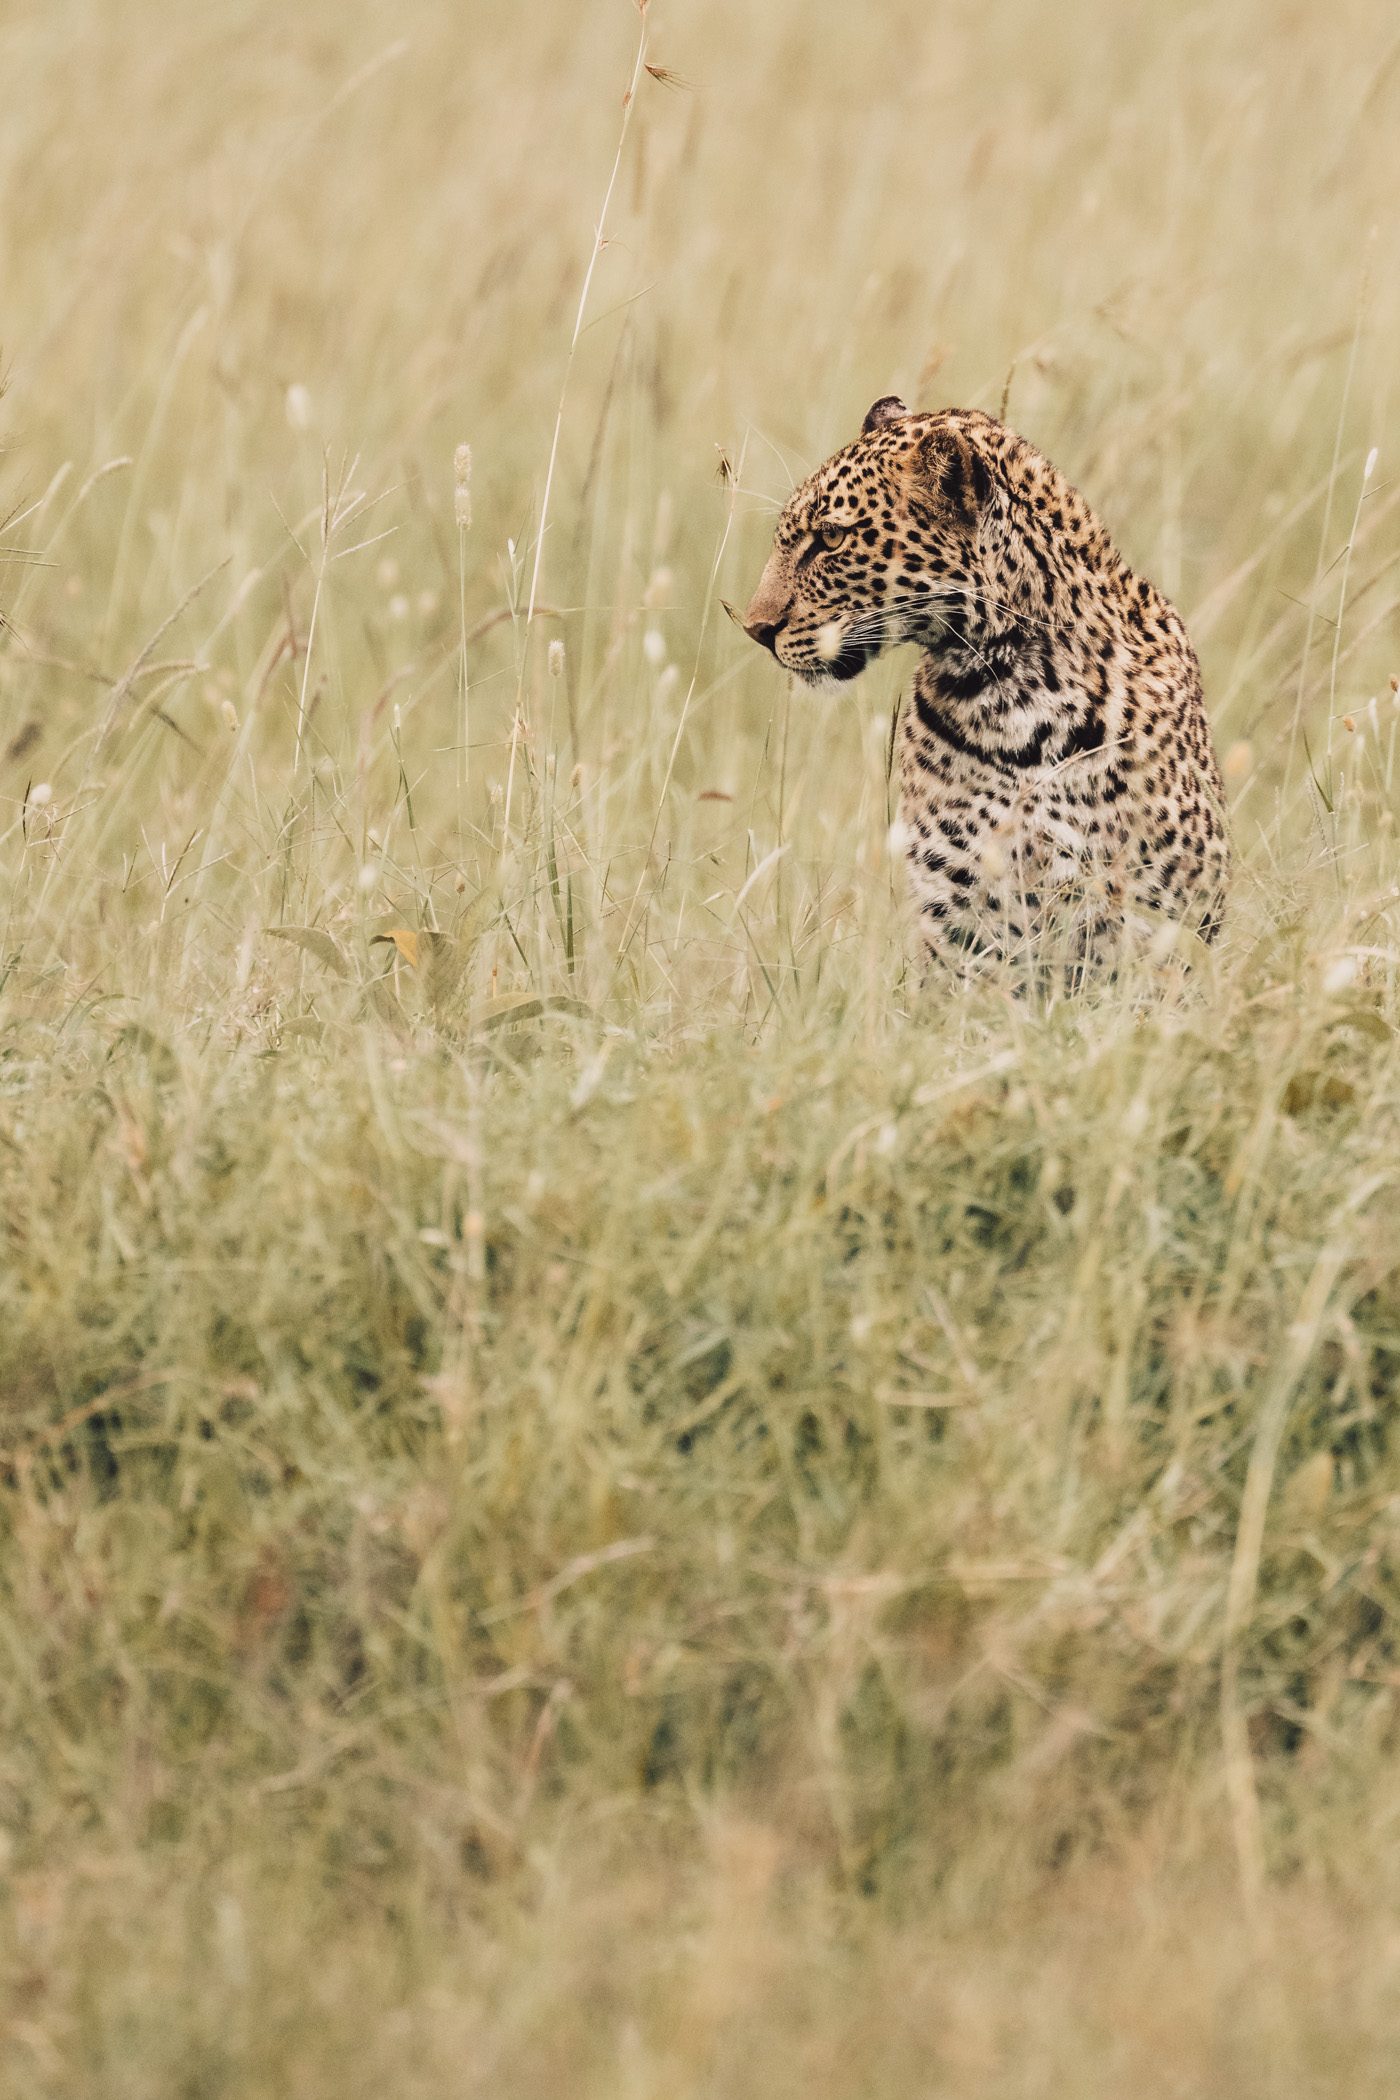 A young leopard called Roho in the Maasai Mara